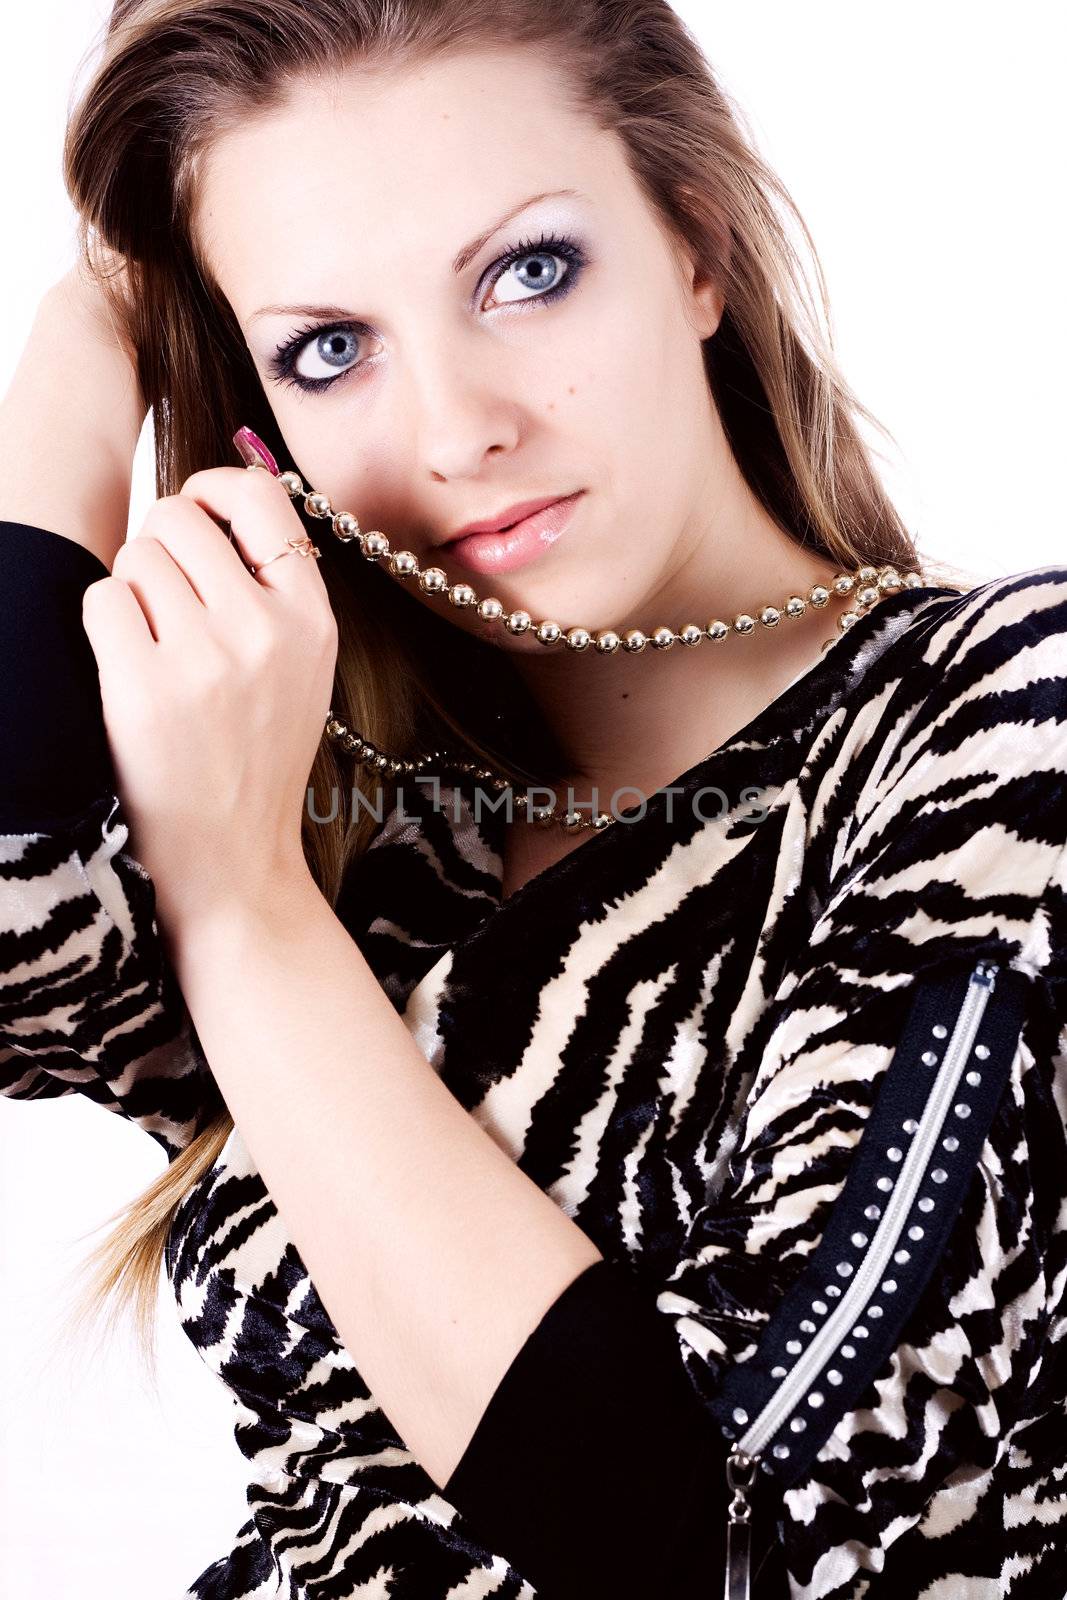 Ambition and greed in fashion woman with jewelry in hands on white background
